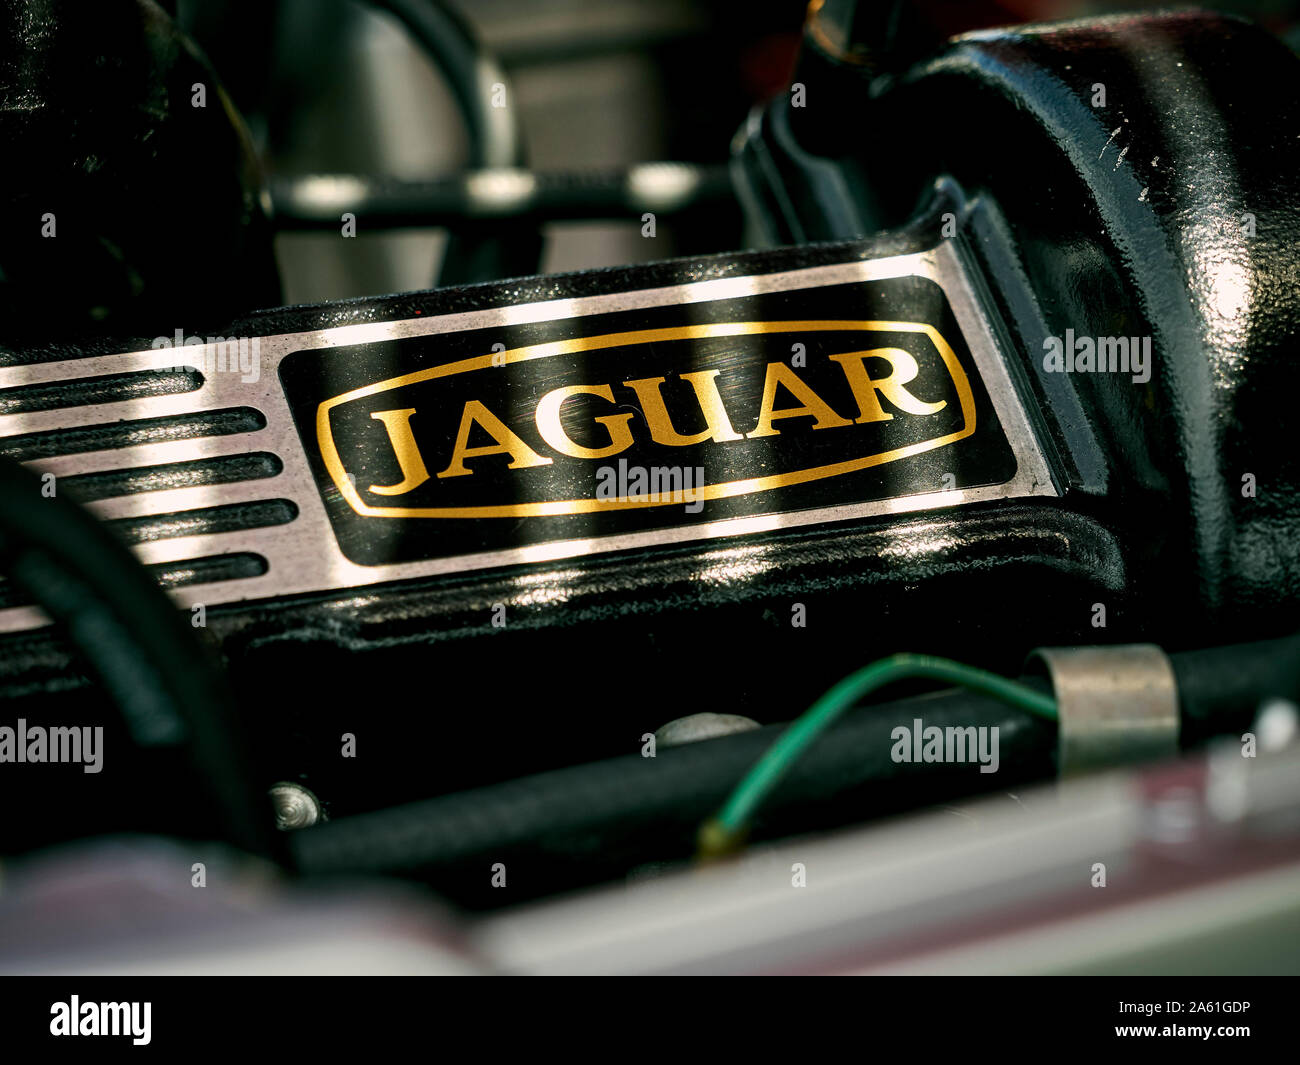 Detail of Jaguar E Type 4.2 Litre Engine, a two door British made sports car produced between 1961 and 1975. Stock Photo